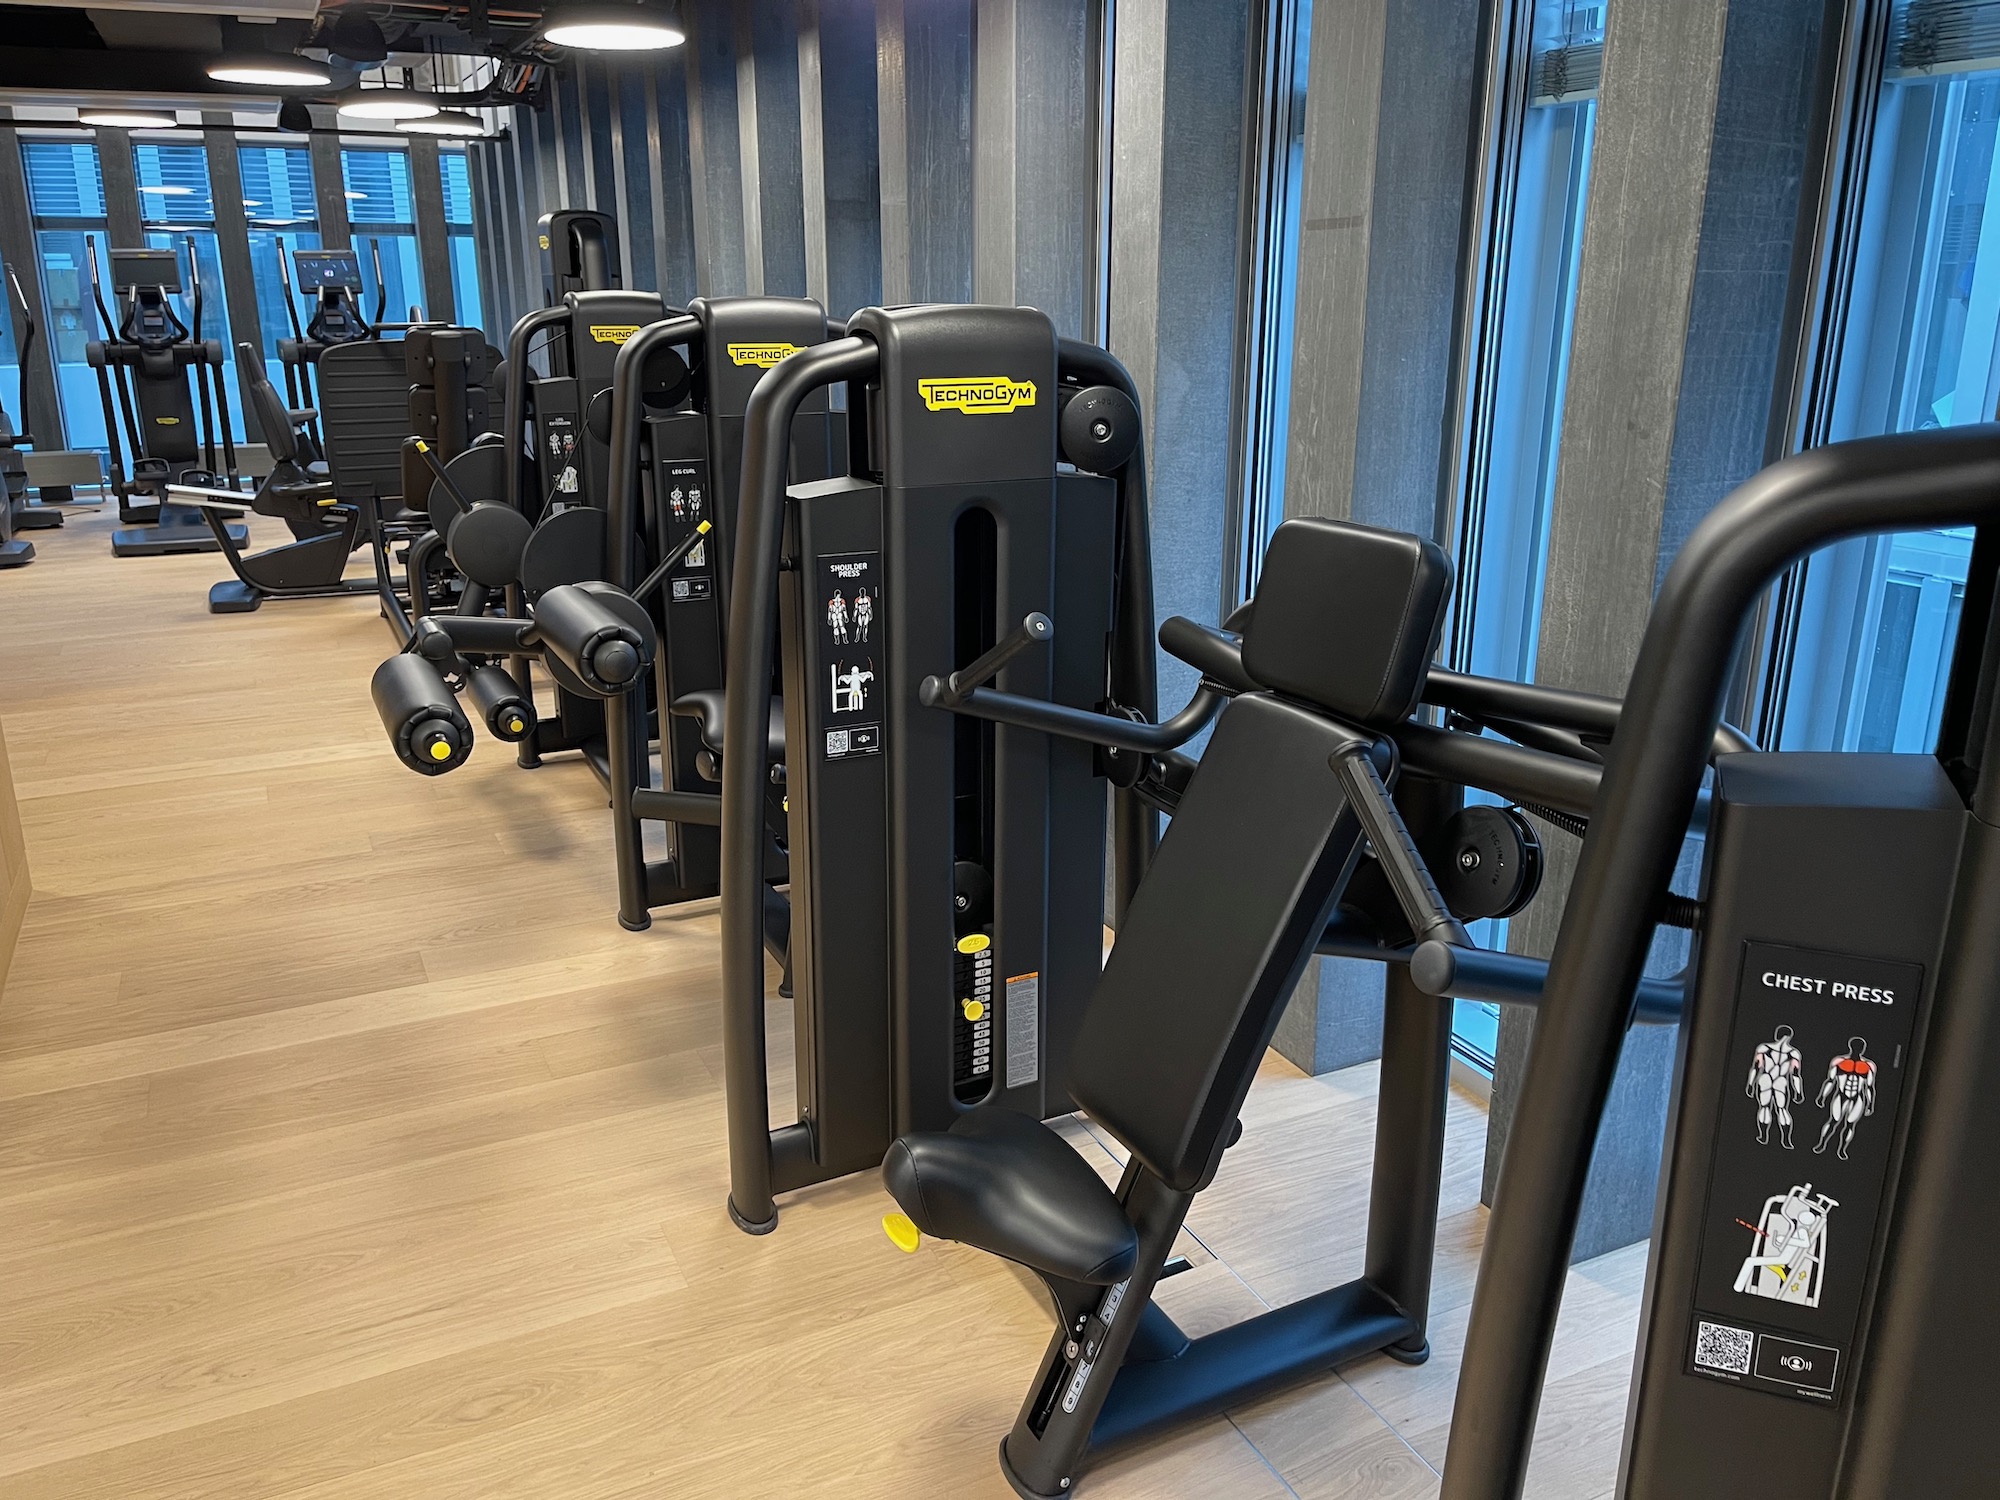 a row of exercise equipment in a gym